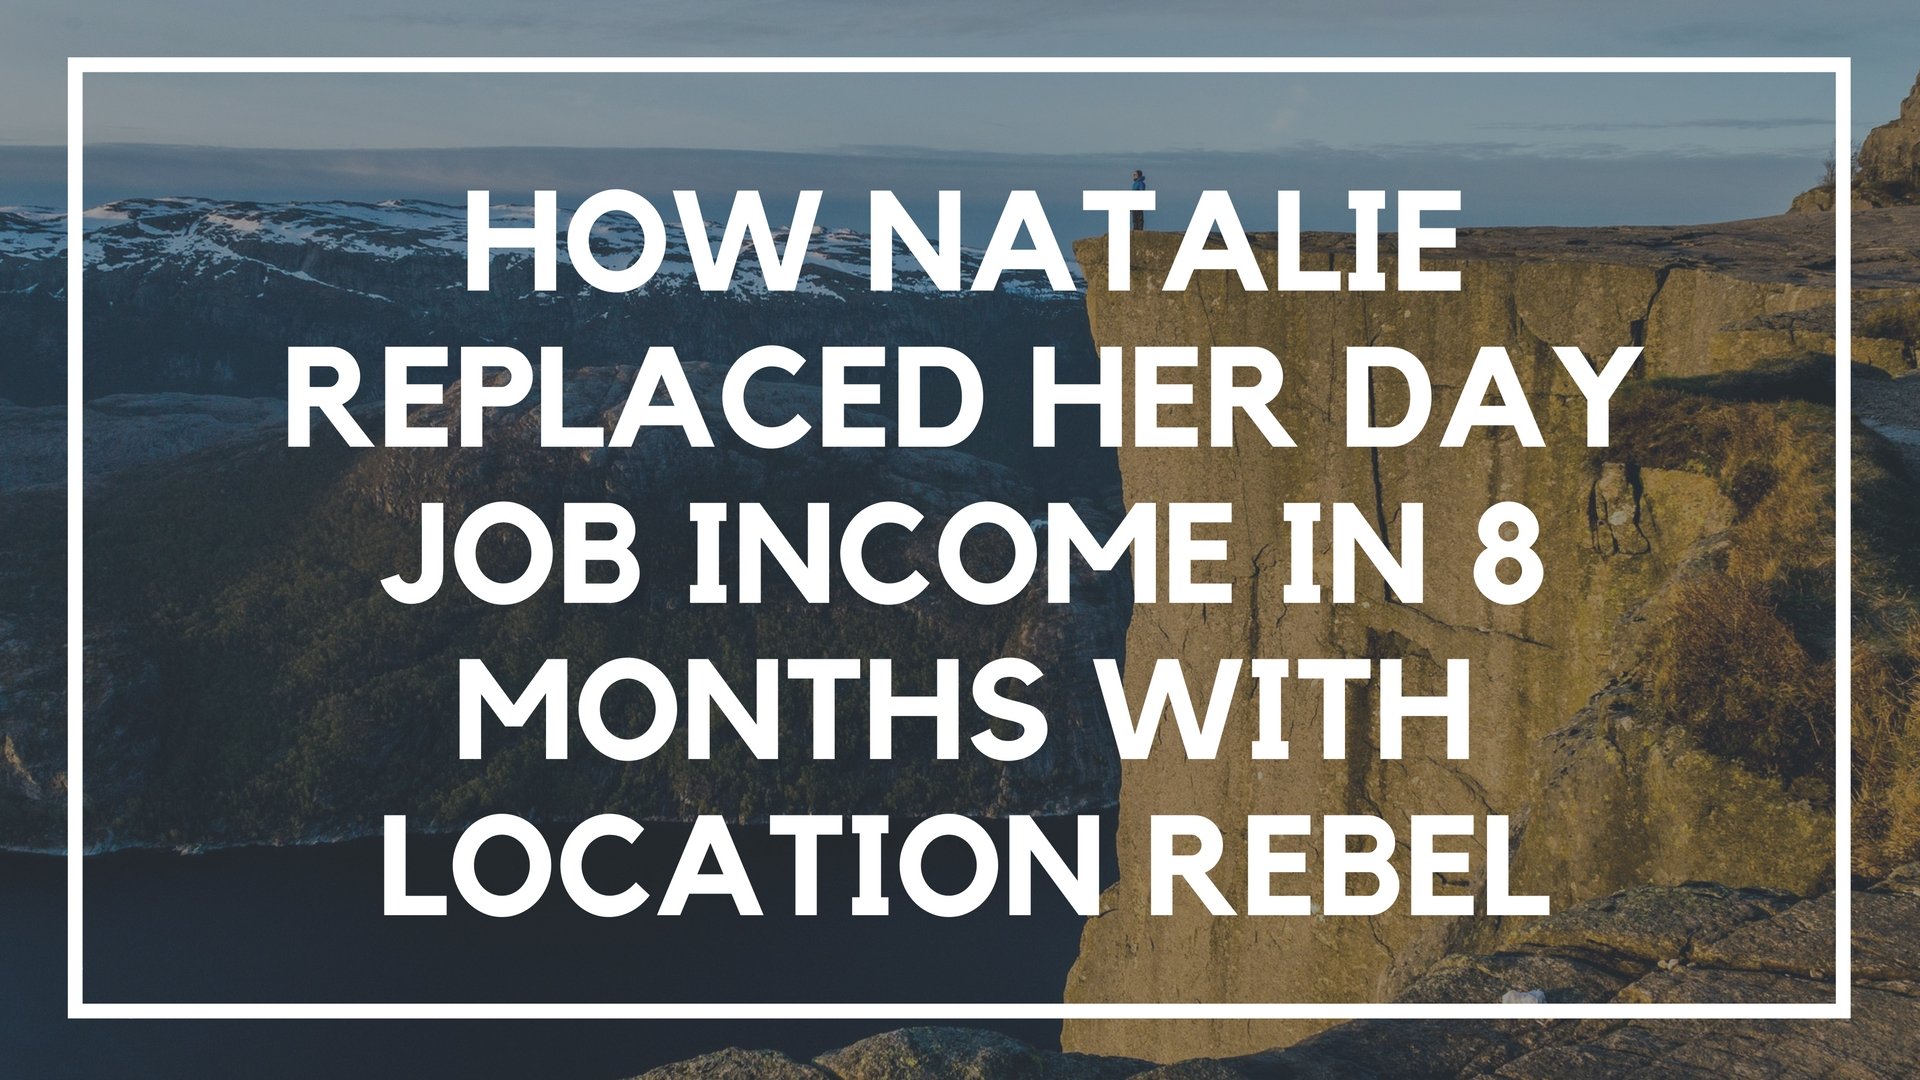 LRA Member Story: How Natalie Replaced Her Day Job Income in 8 Months With Location Rebel